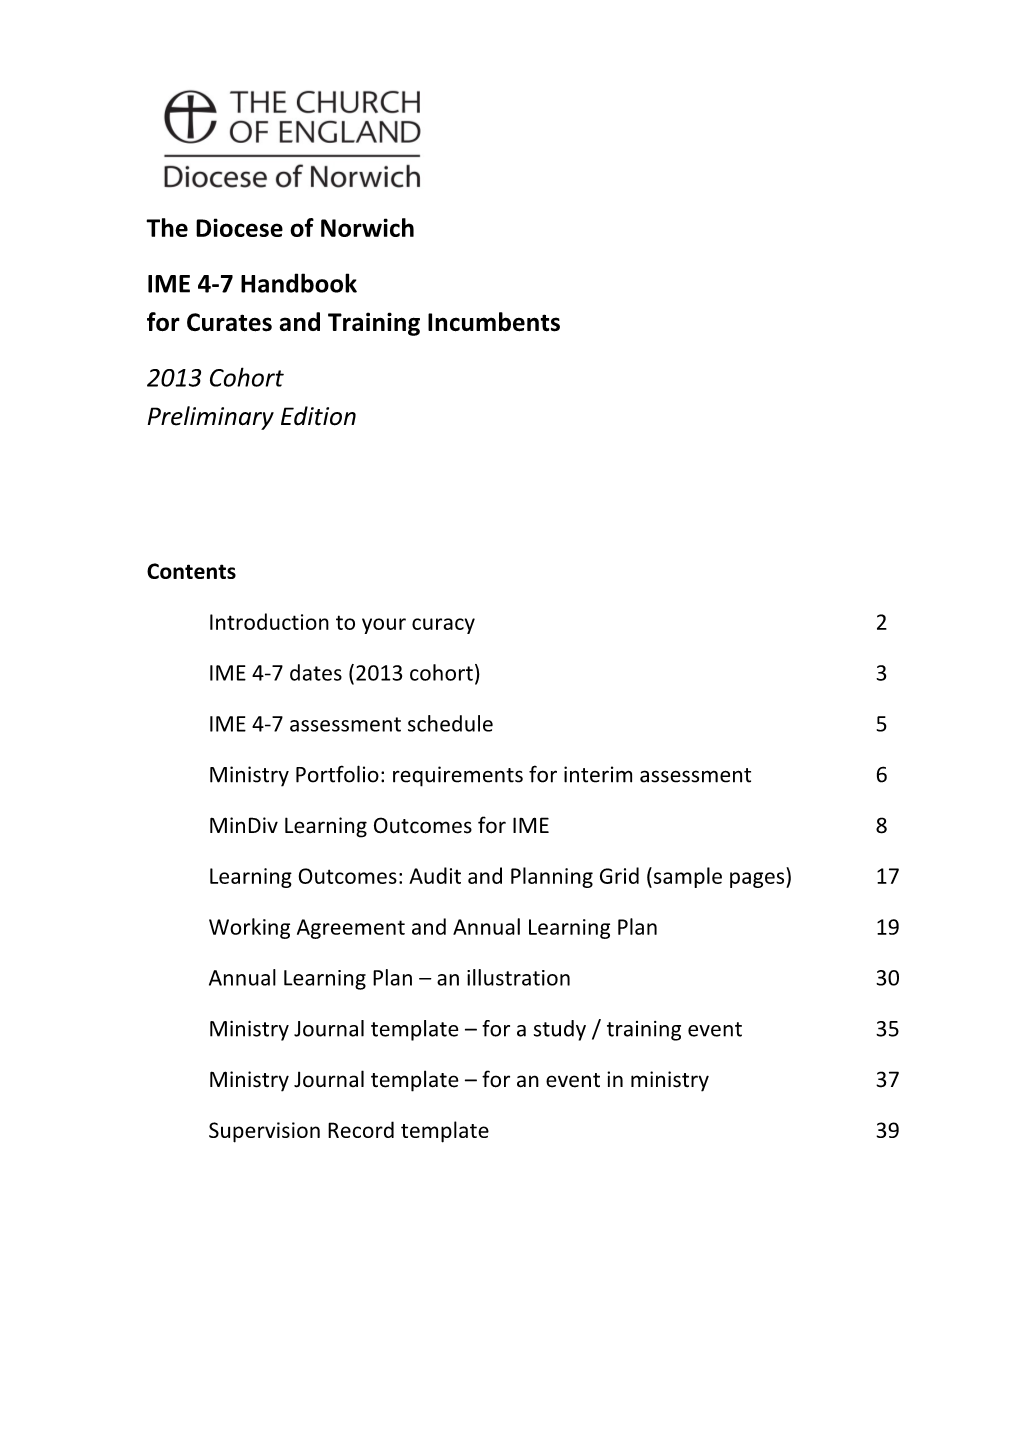 IME 4-7 Handbook for Curates and Training Incumbents